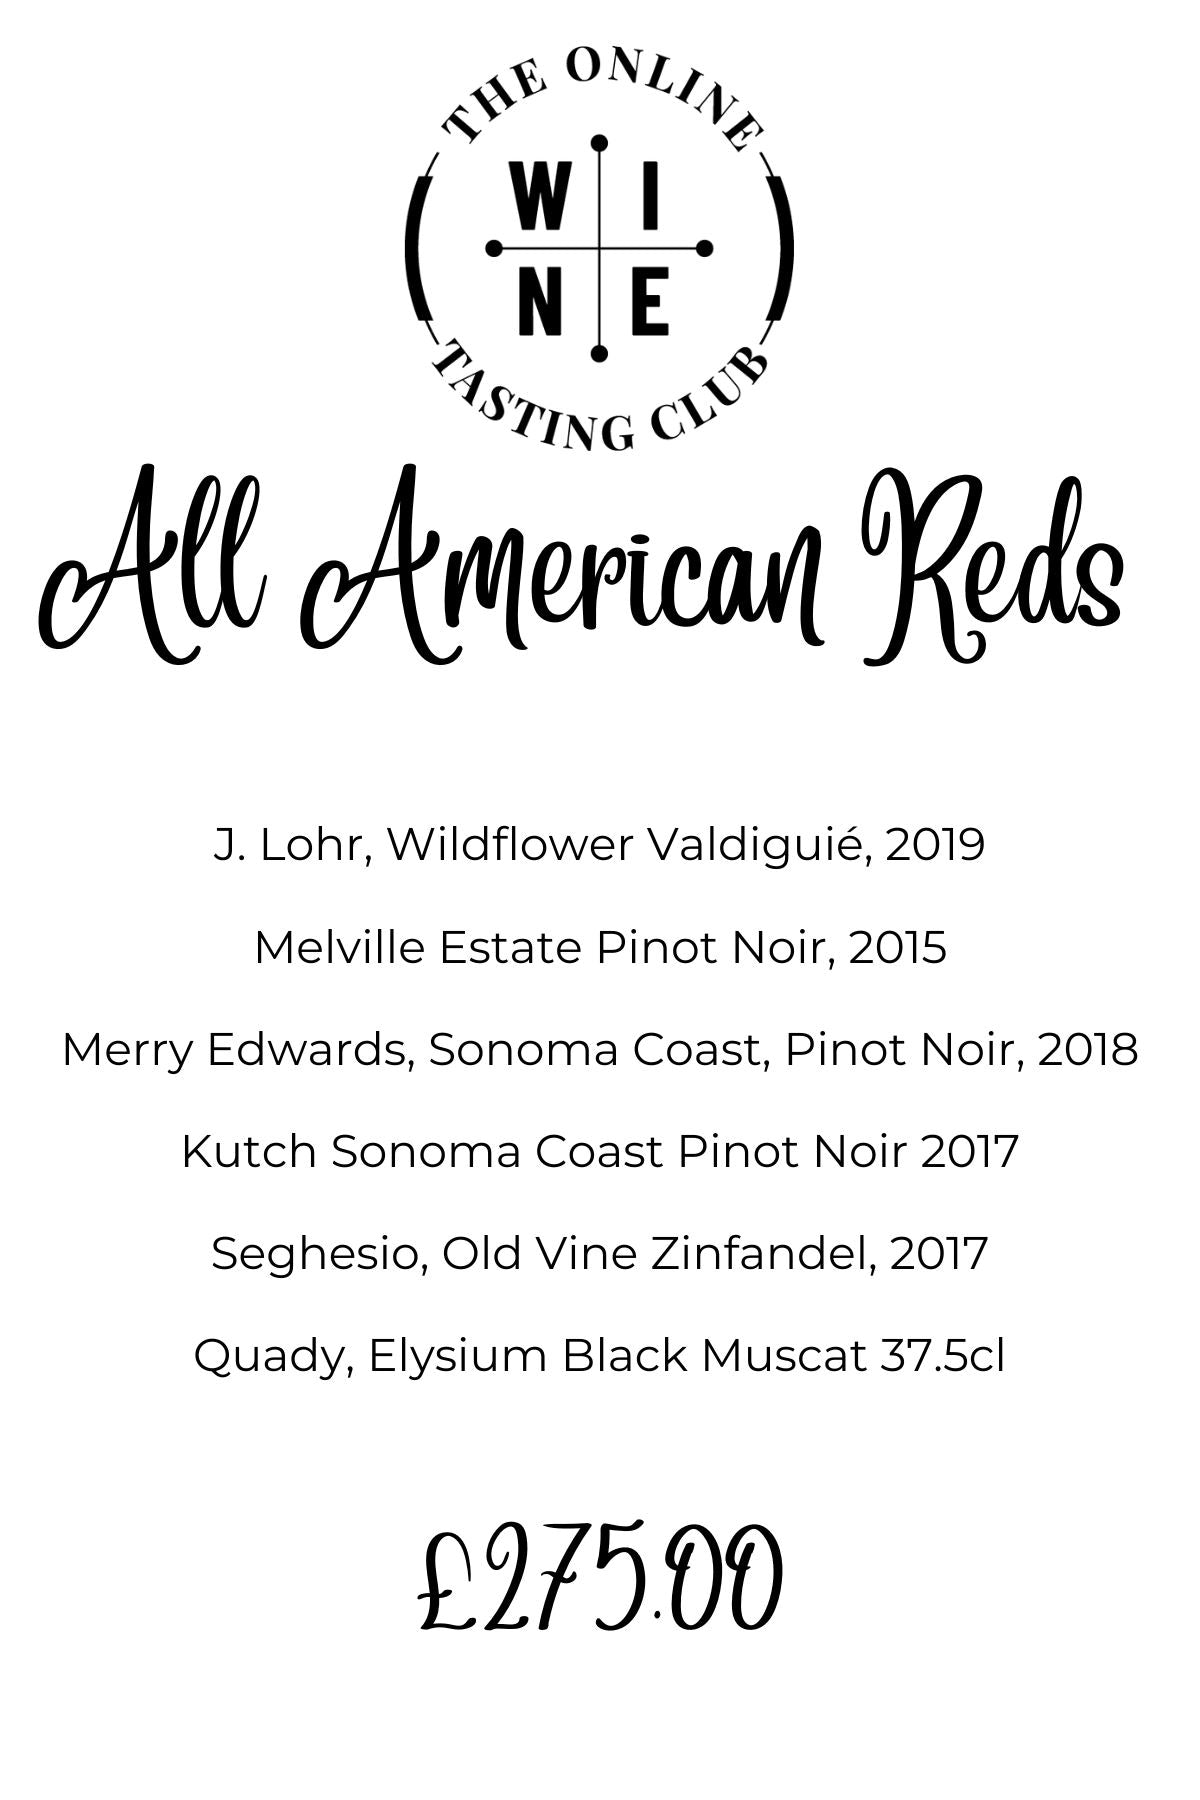 All American Reds Wine Cases The Online Wine Tasting Club 